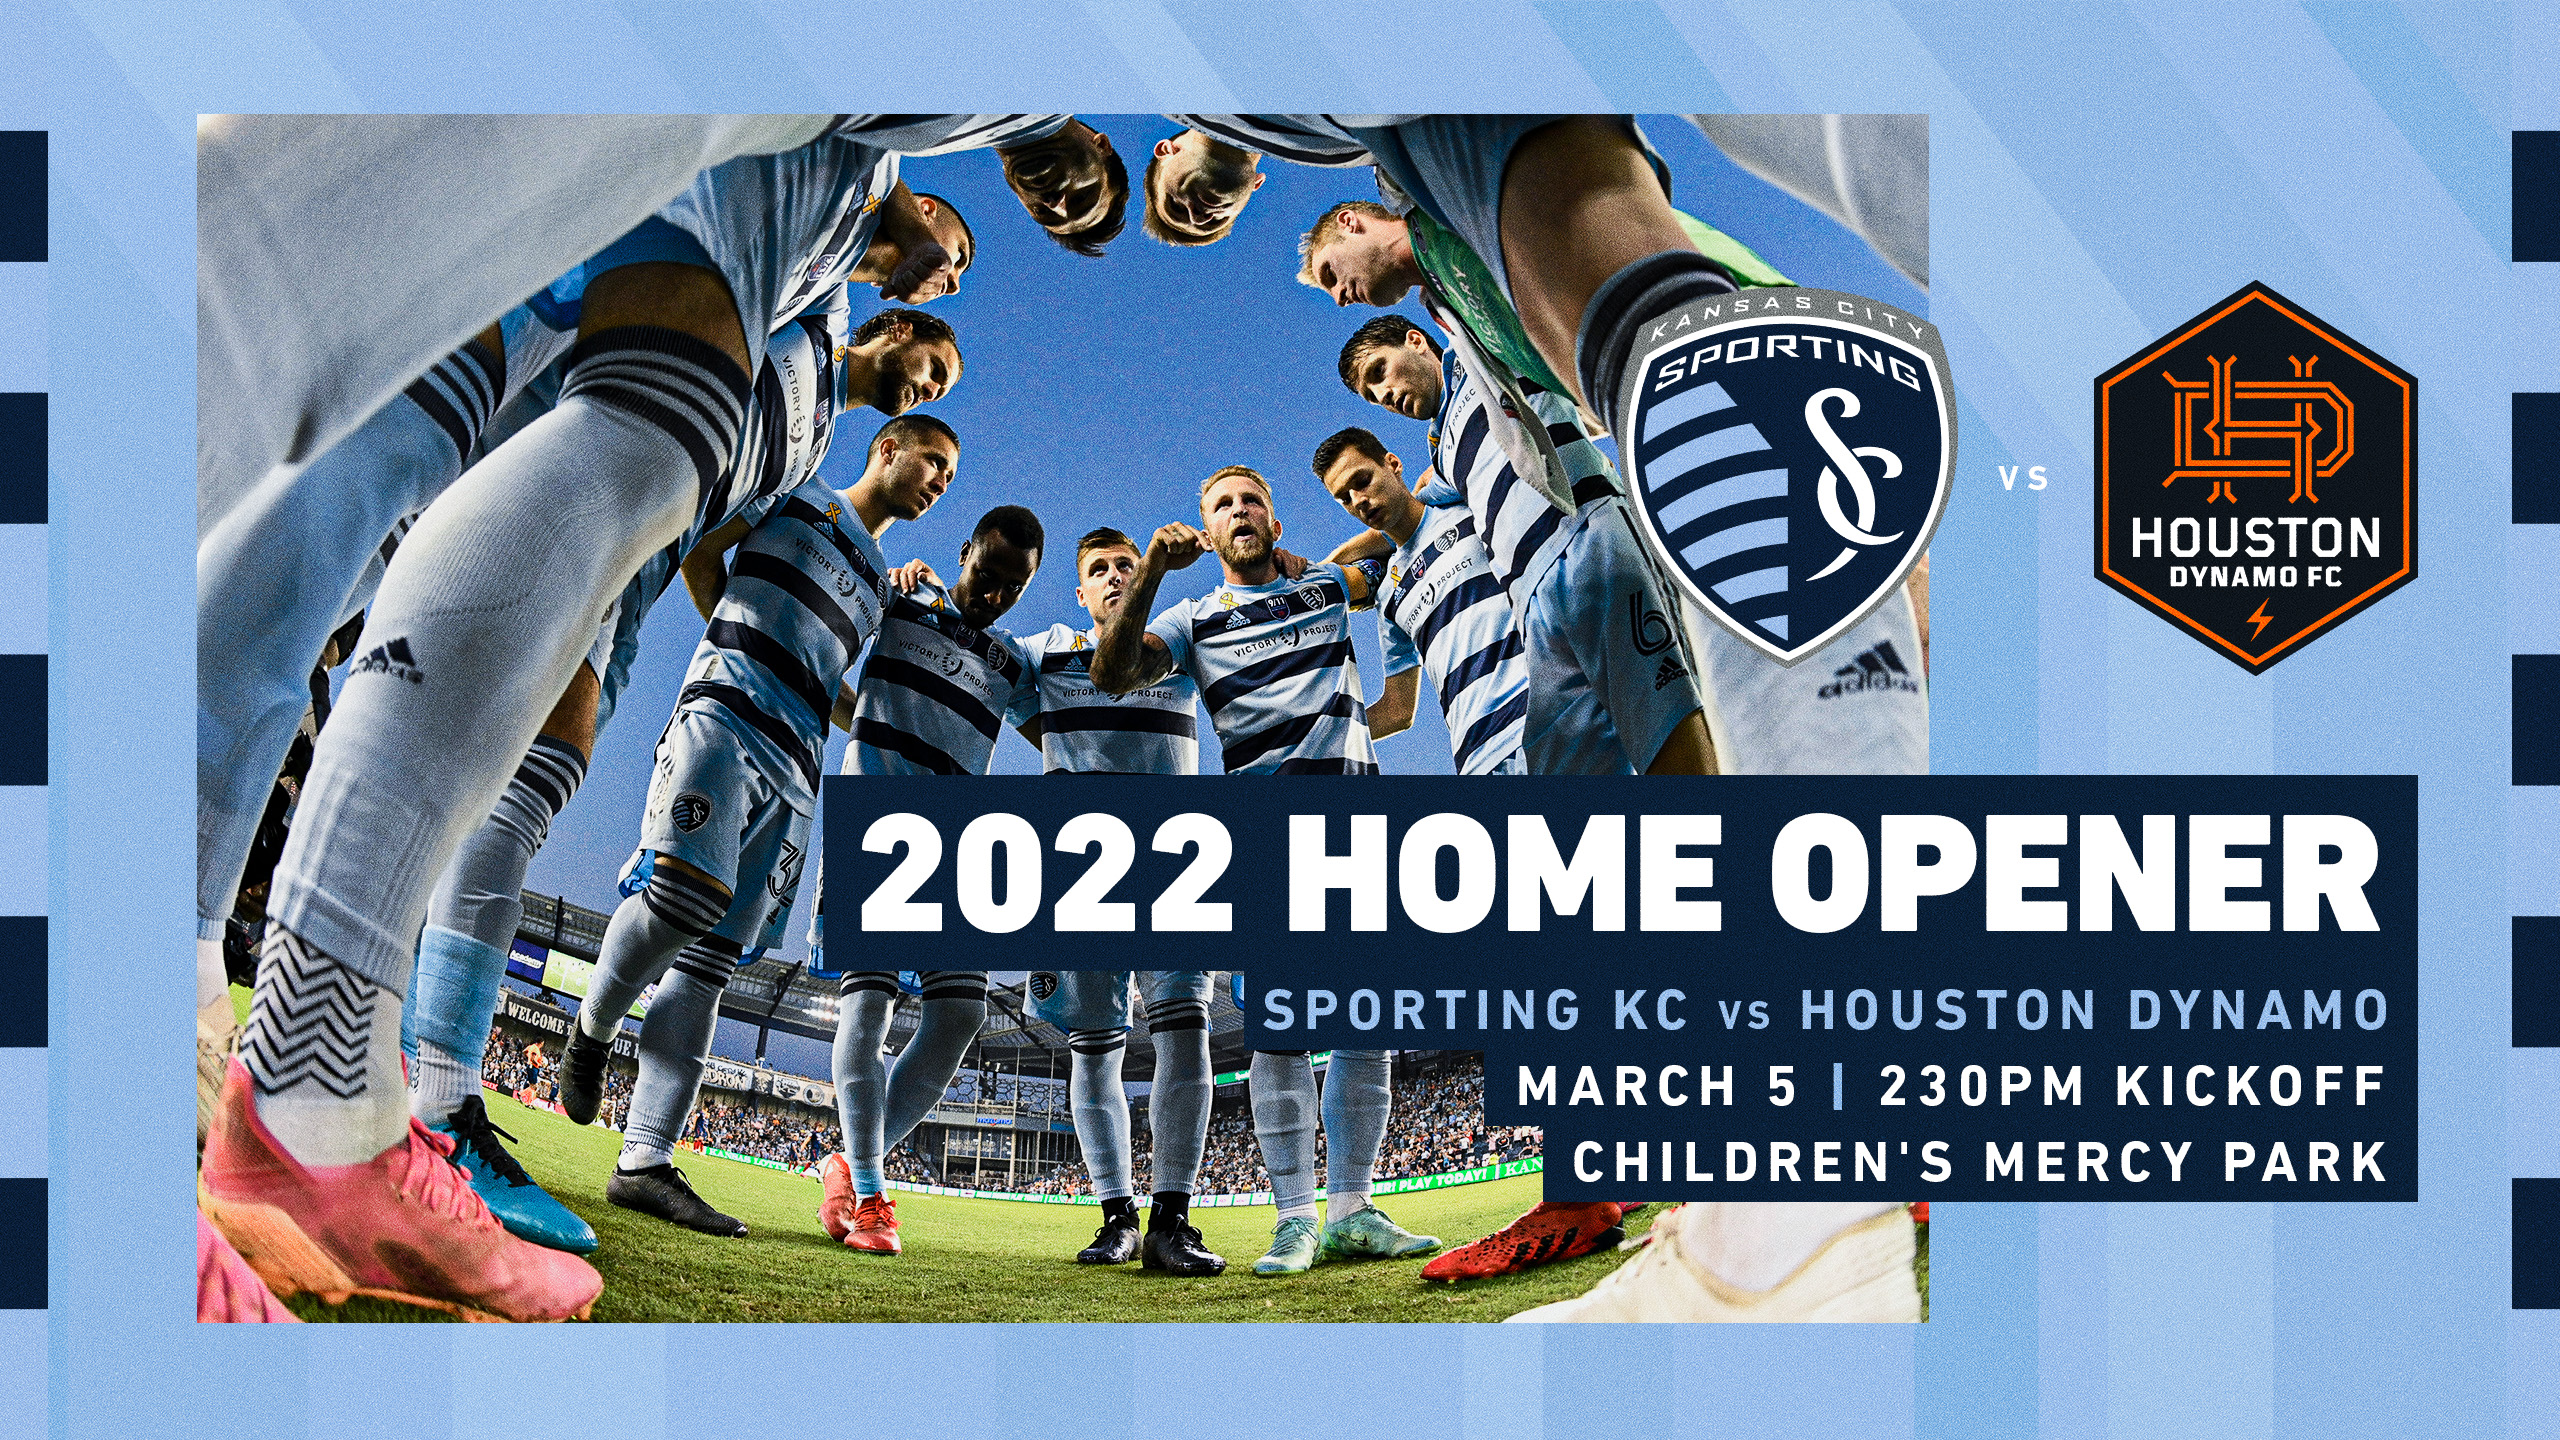 Mls Announces Opening Home And Away Matches On Sporting's 2022 Regular Season Schedule | Sporting Kansas City